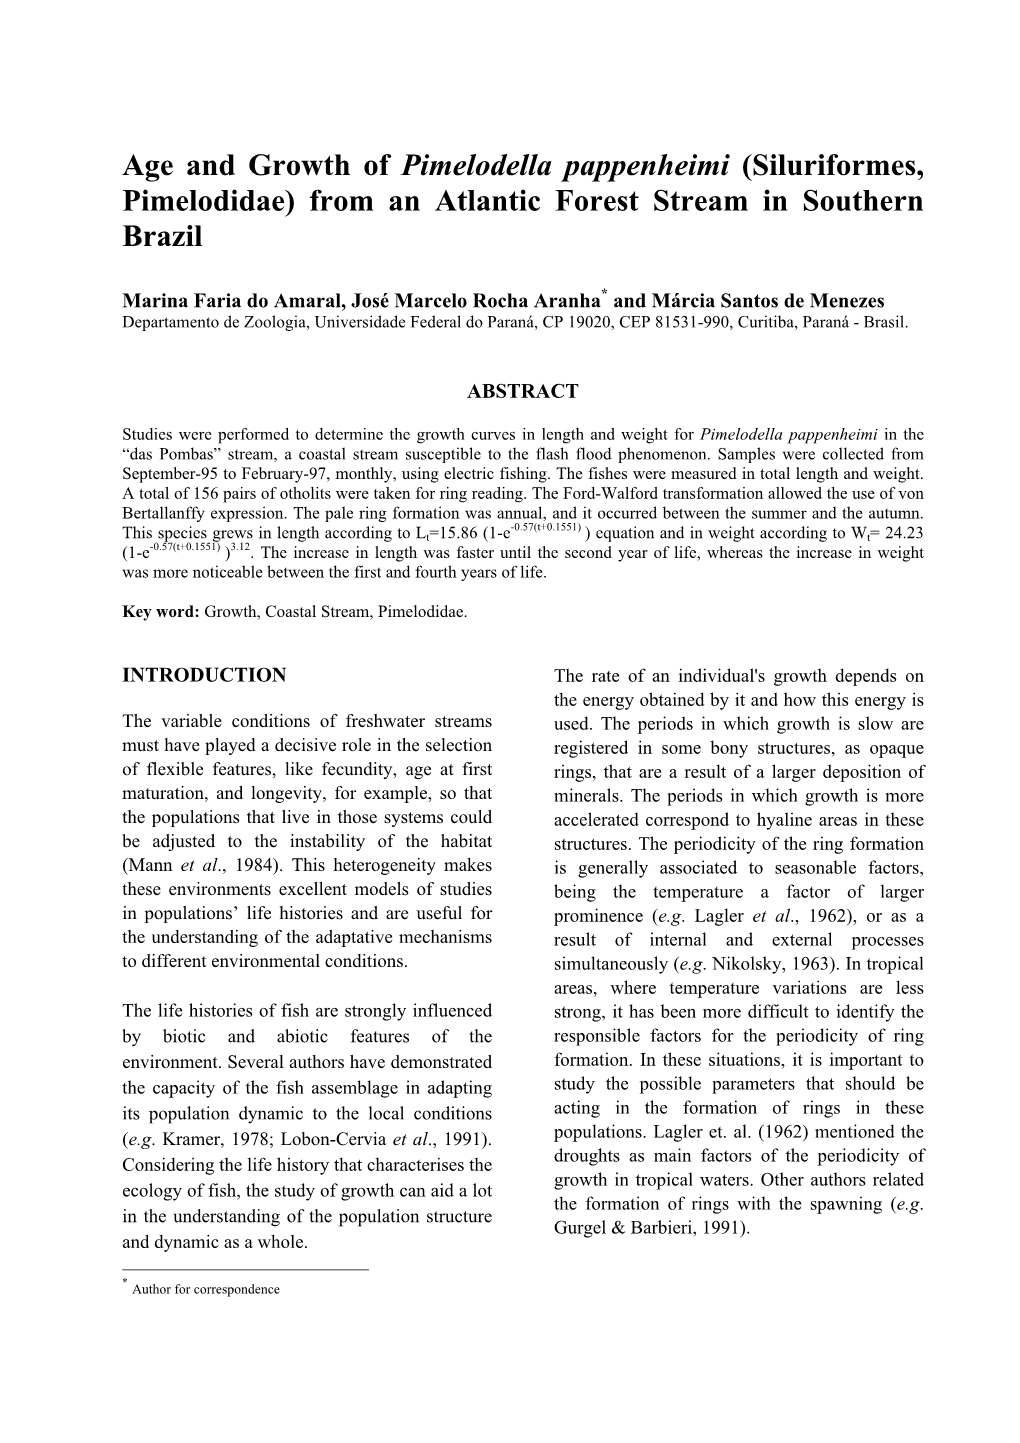 Age and Growth of Pimelodella Pappenheimi (Siluriformes, Pimelodidae) from an Atlantic Forest Stream in Southern Brazil